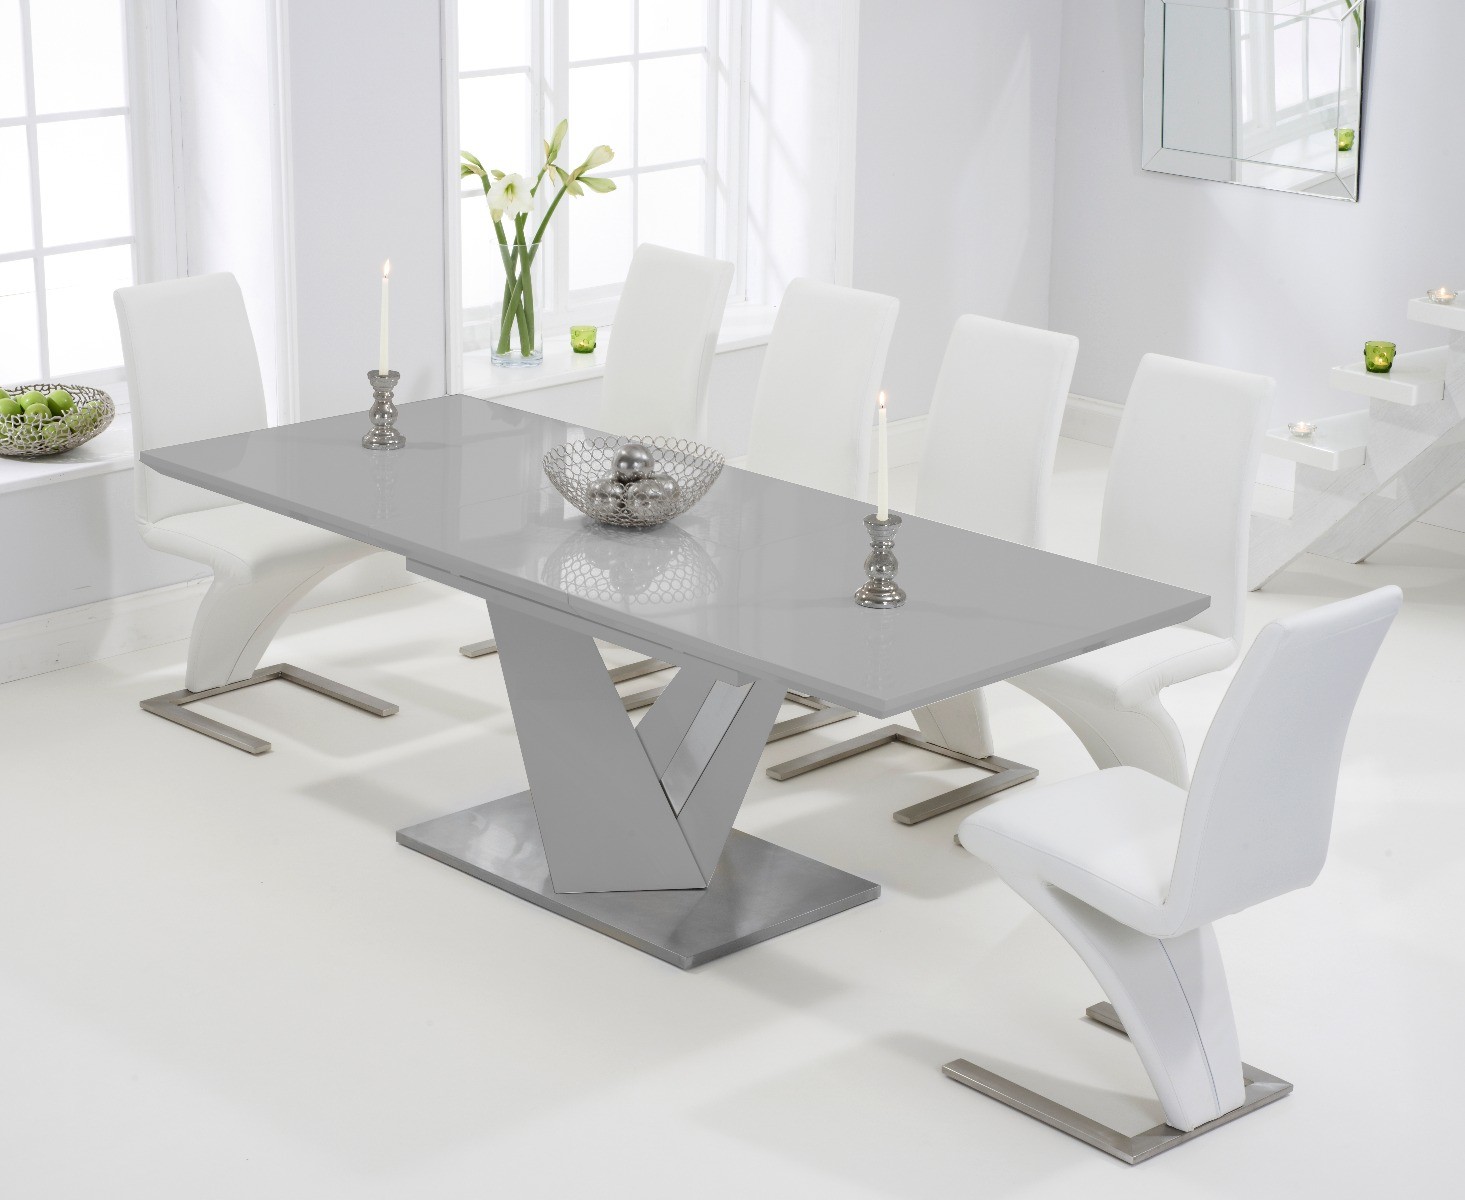 Extending Santino 160cm Light Grey High Gloss Dining Table With 10 White Aldo Chairs